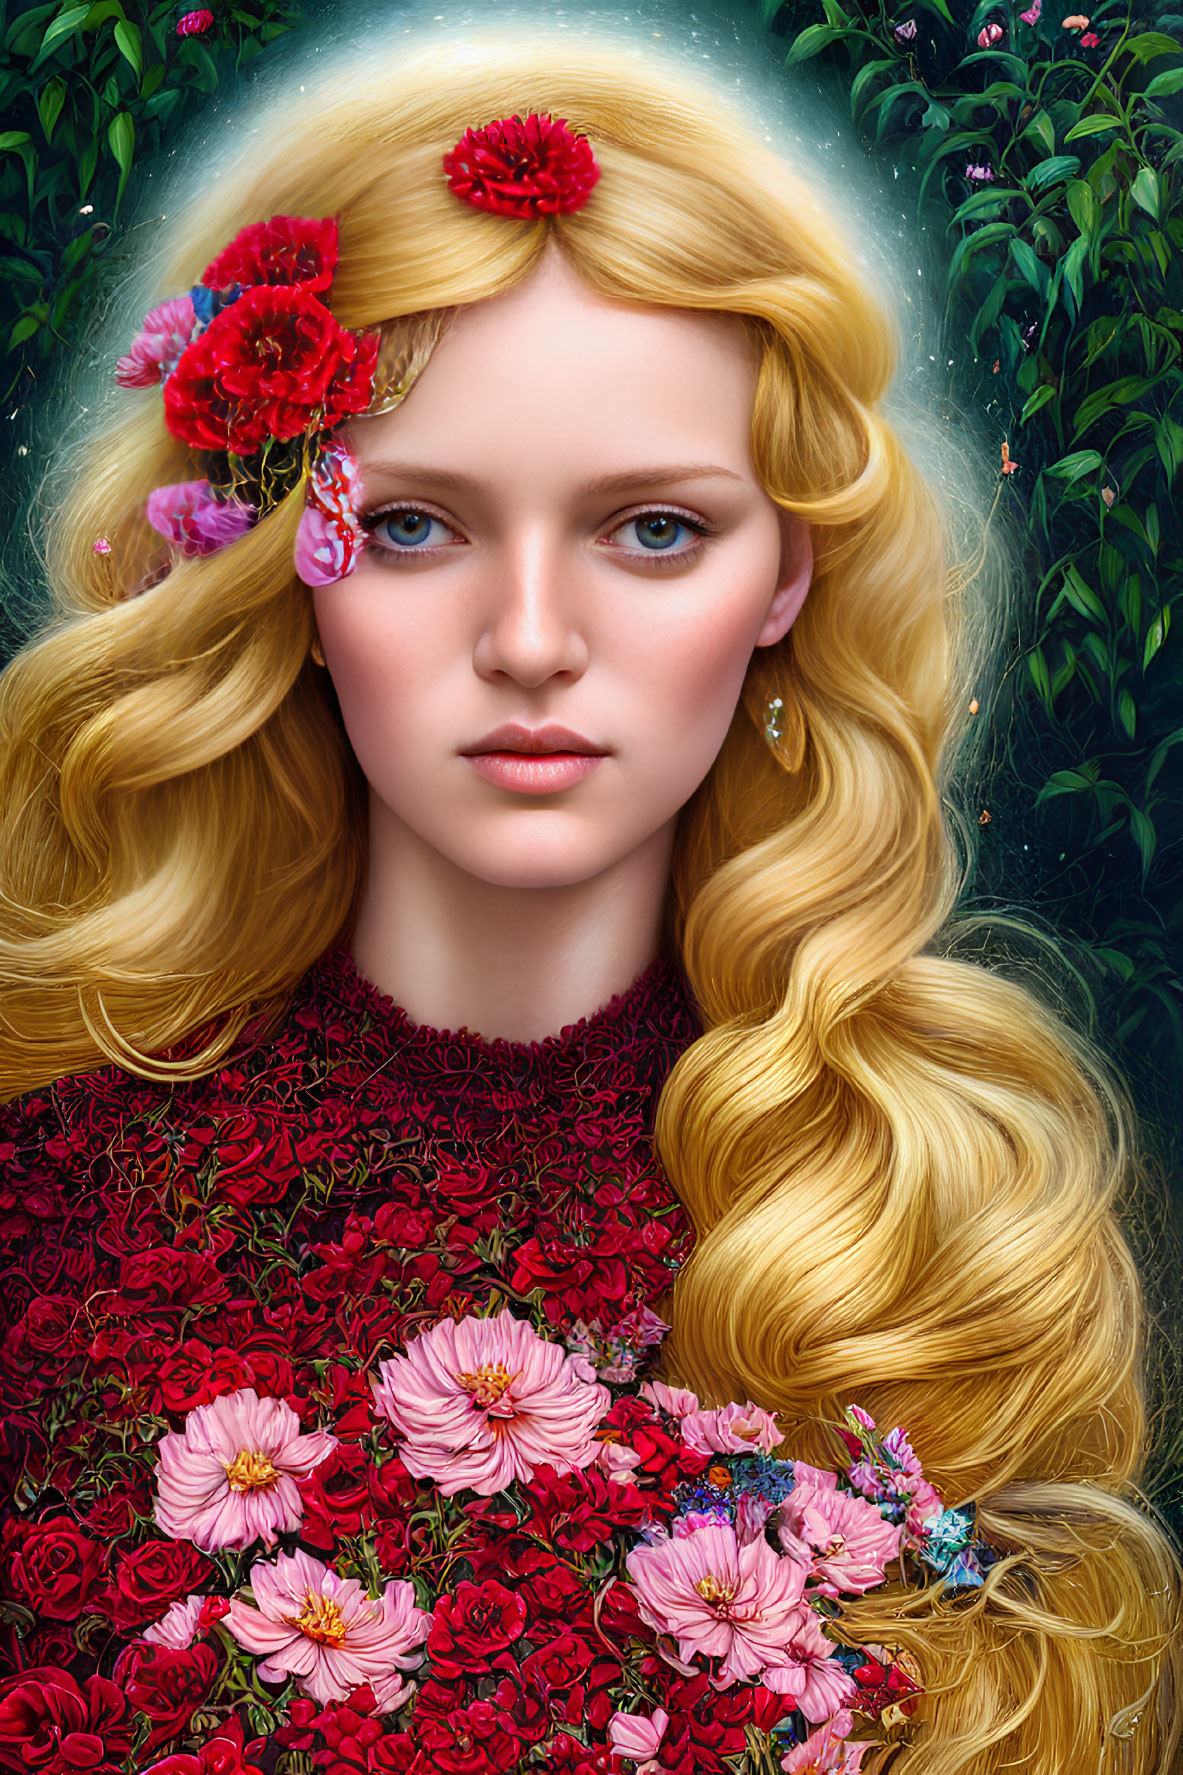 Portrait of woman with blonde hair, blue eyes, red and pink flowers on green foliage.